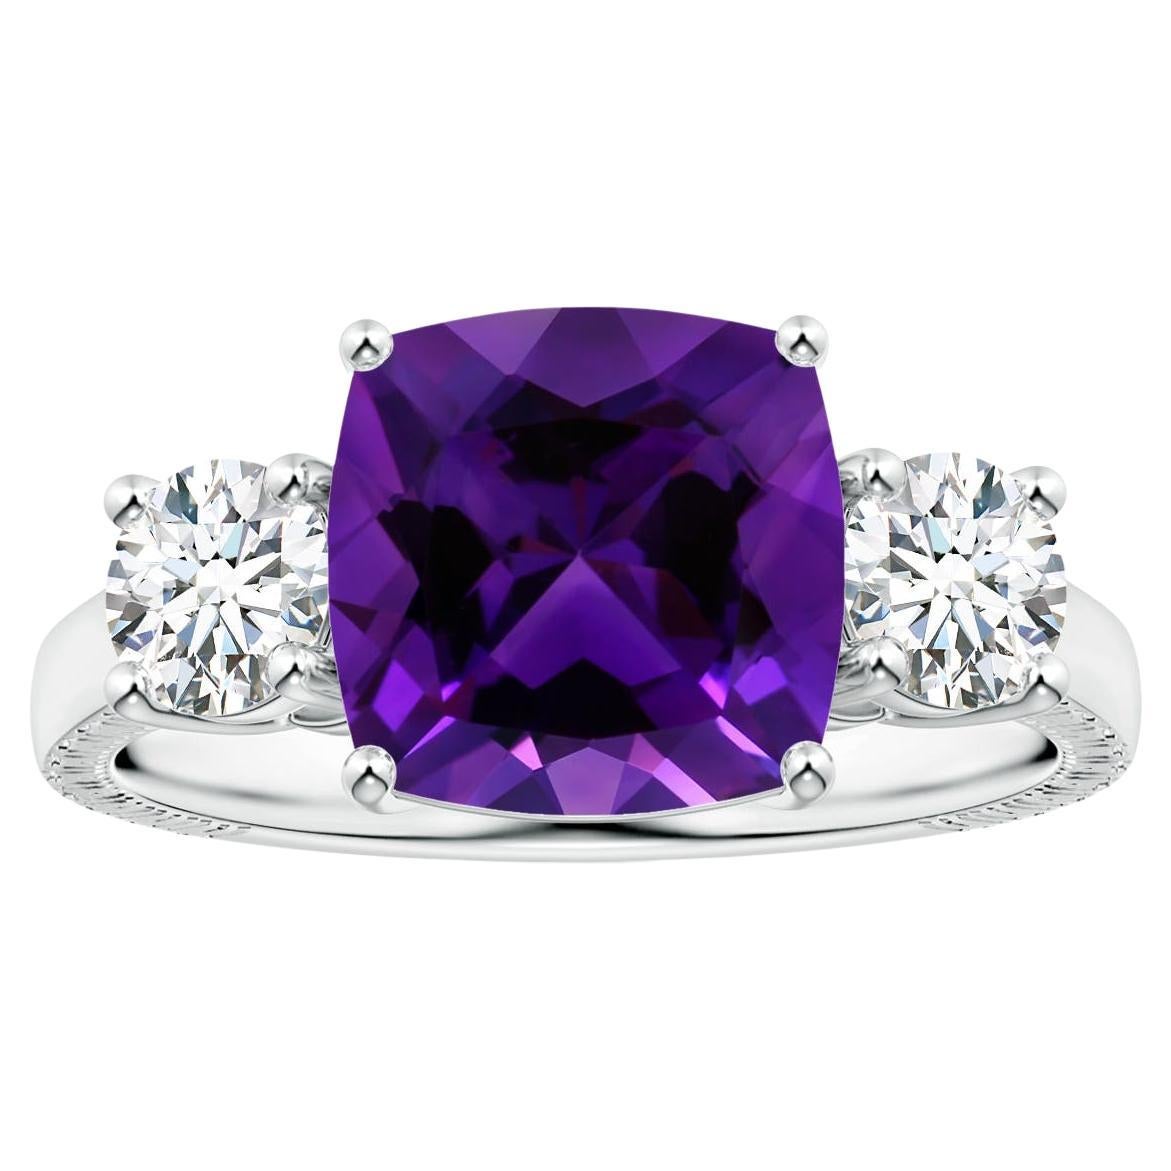 For Sale:  Angara Gia Certified Natural Amethyst Three Stone Ring in White Gold